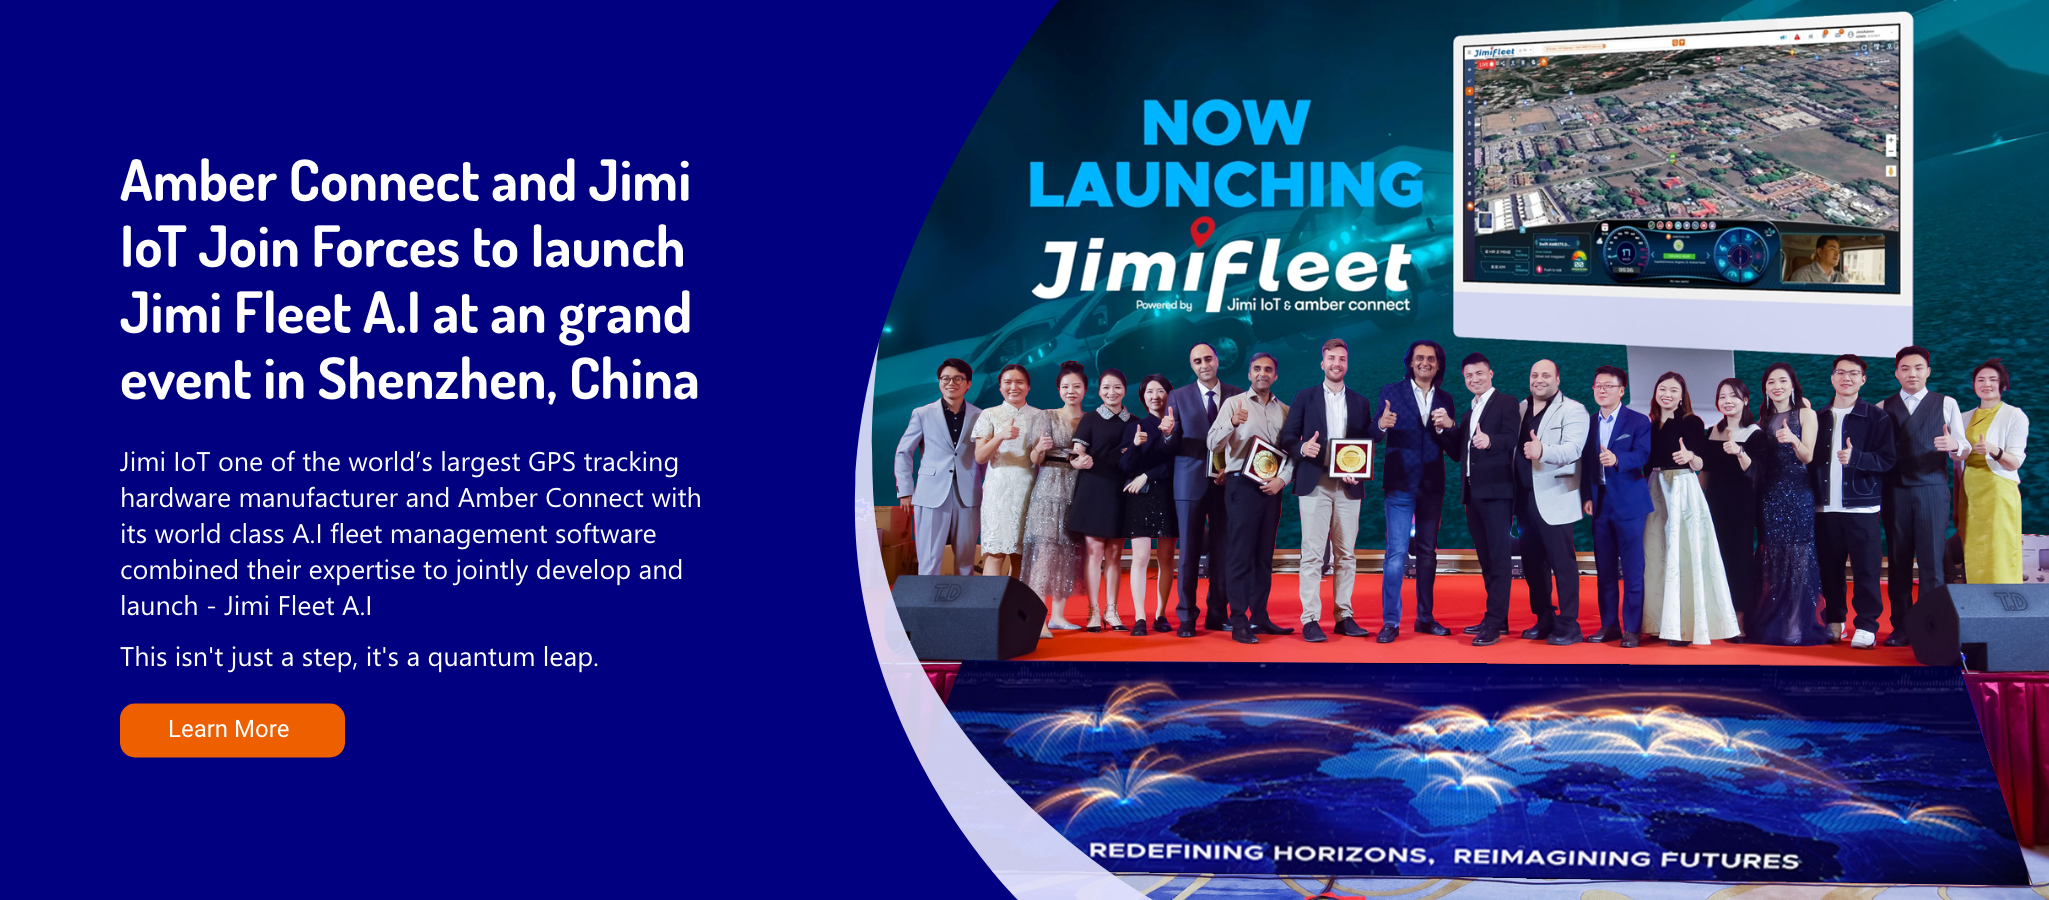 Amber Connect and Jimi IoT Join Forces to launch Jimi Fleet A.I at an grand event in Shenzhen, China
                                    